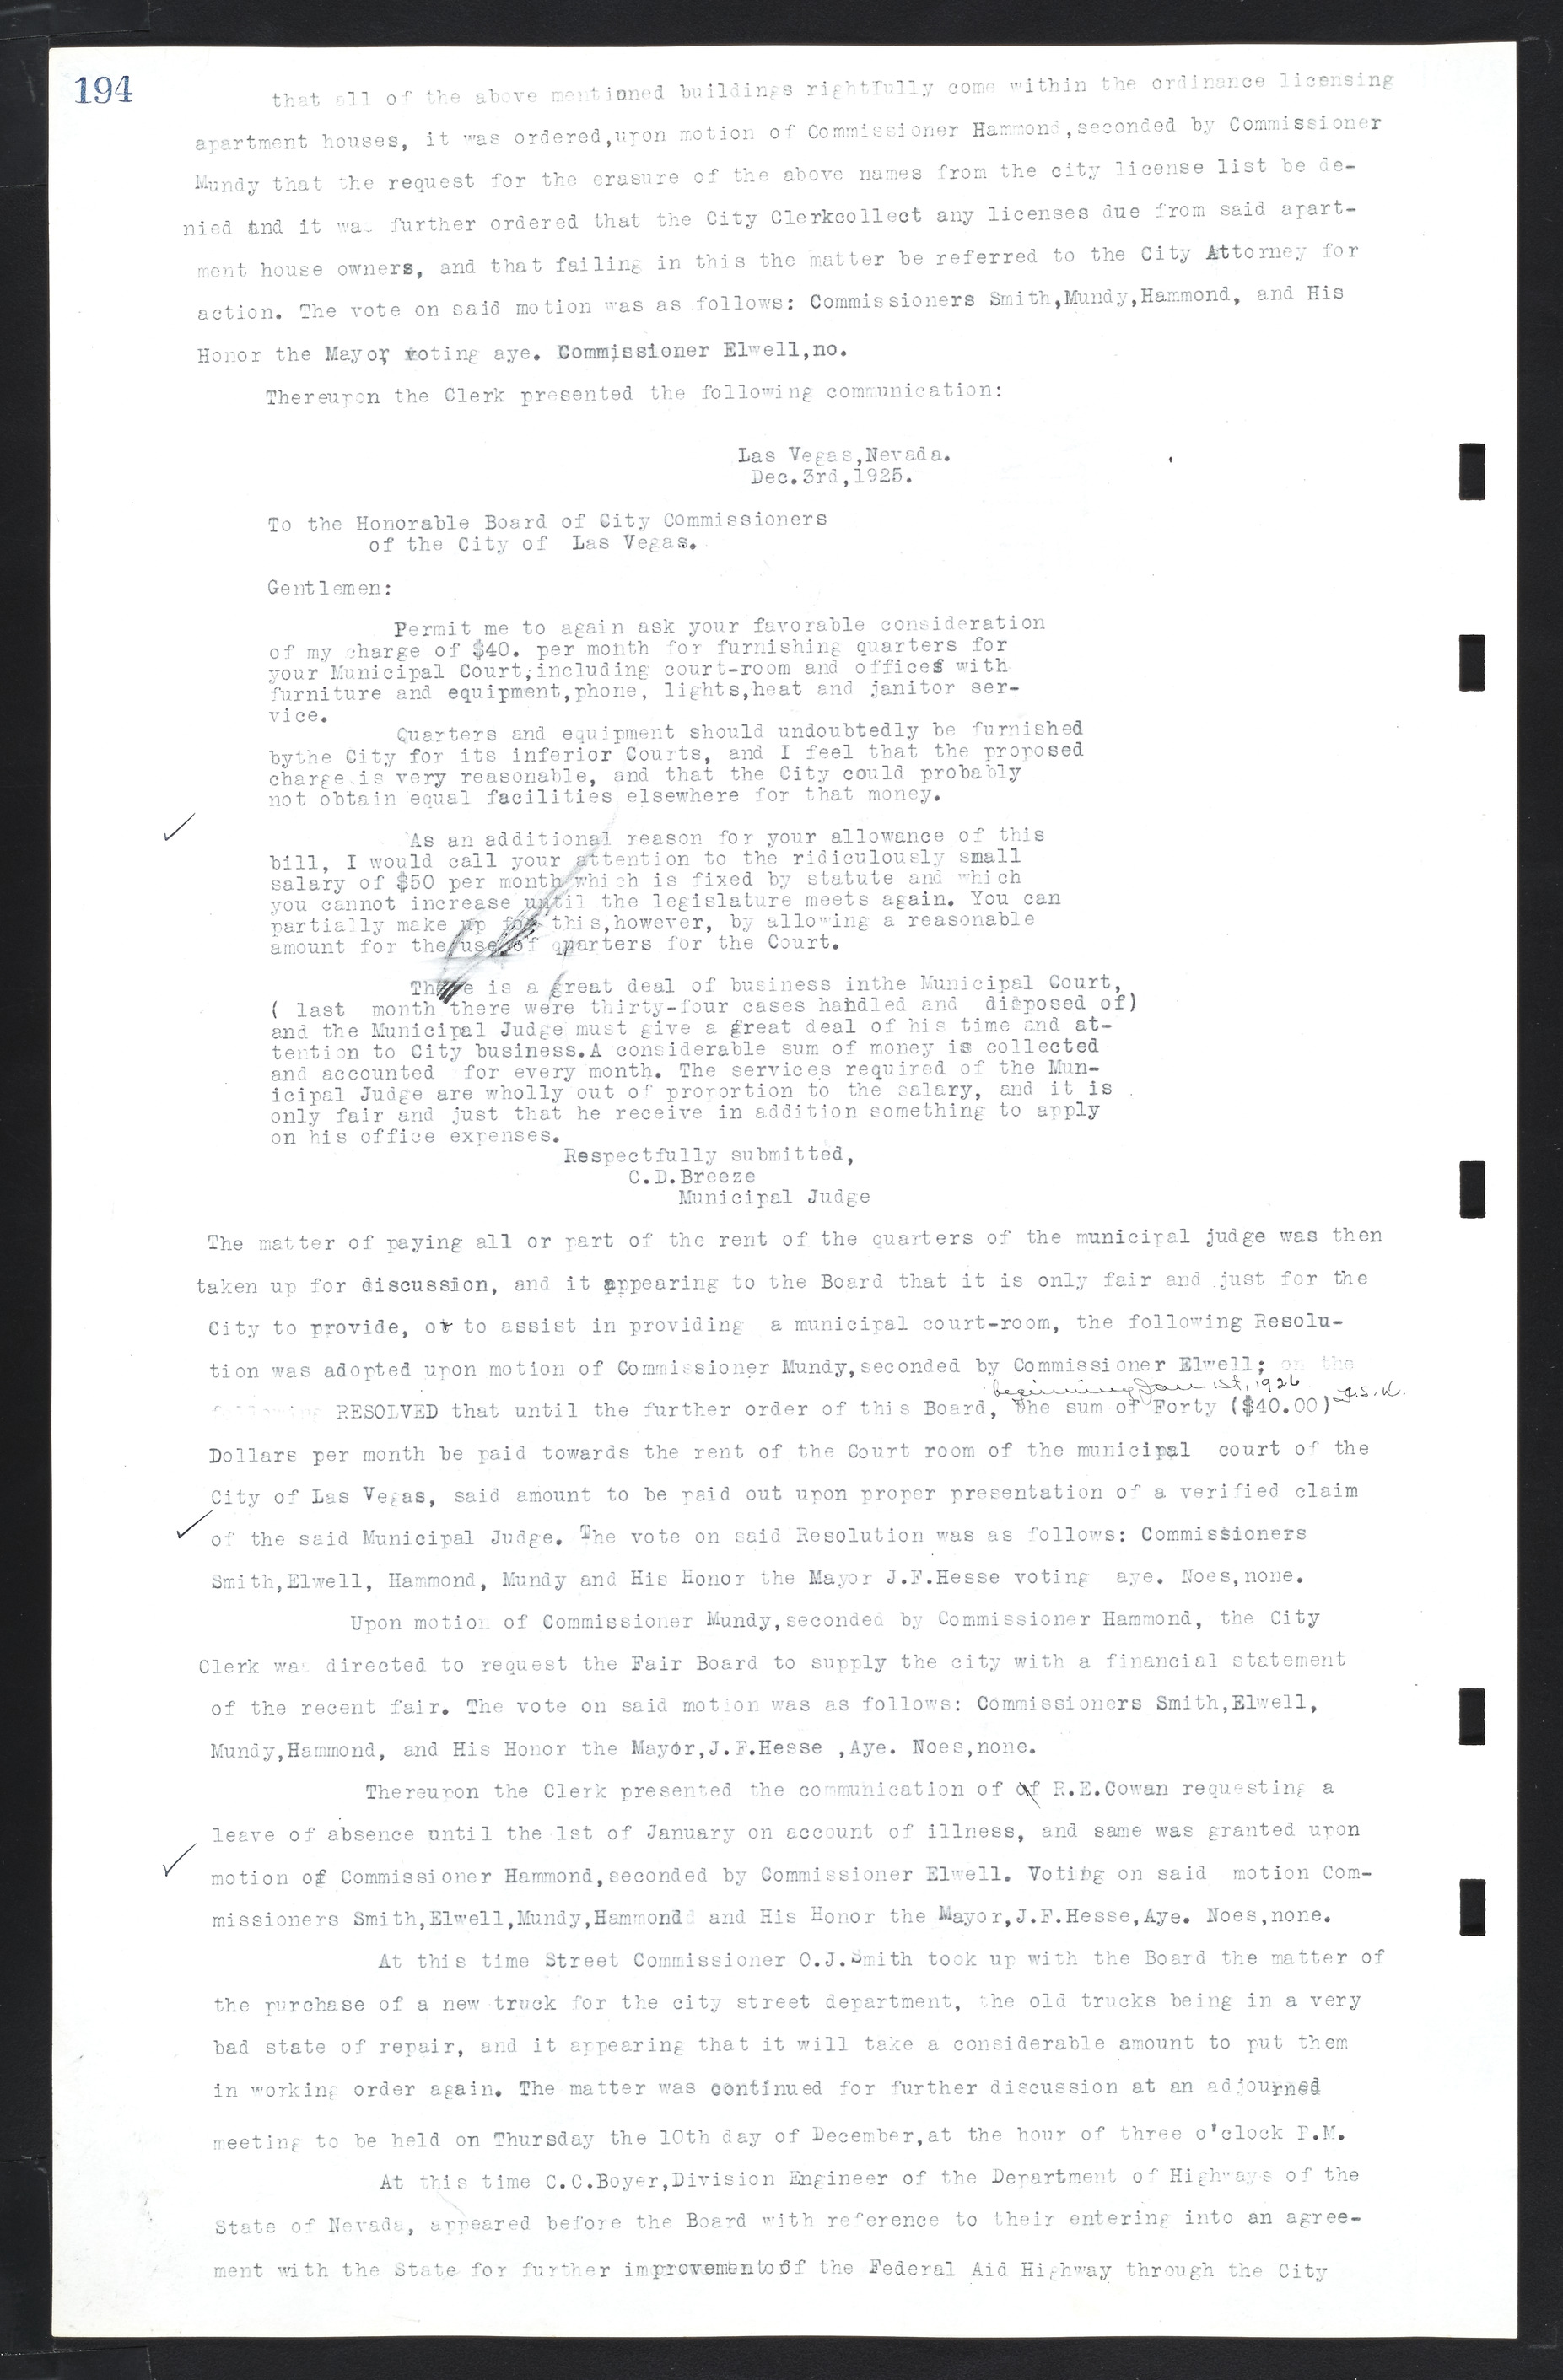 Las Vegas City Commission Minutes, March 1, 1922 to May 10, 1929, lvc000002-201